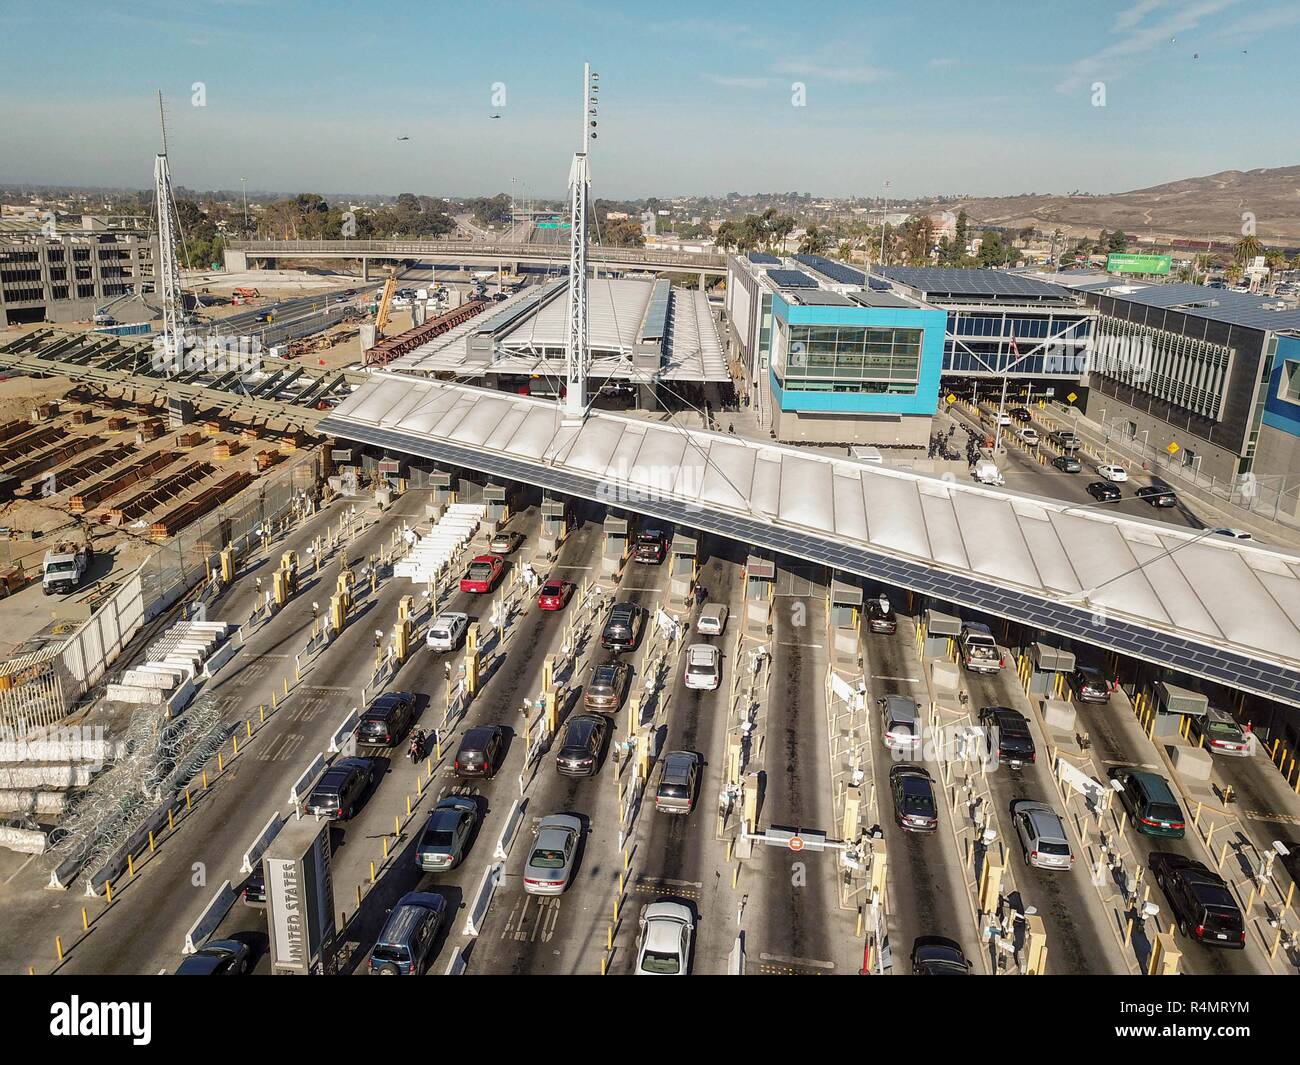 Vehicles line up at the border into the United States from Mexico as Customs and Border Patrol shut it down at the San Ysidro crossing after members of the migrant caravan attempted to illegally cross November 26, 2018 in San Ysidro, California. Stock Photo